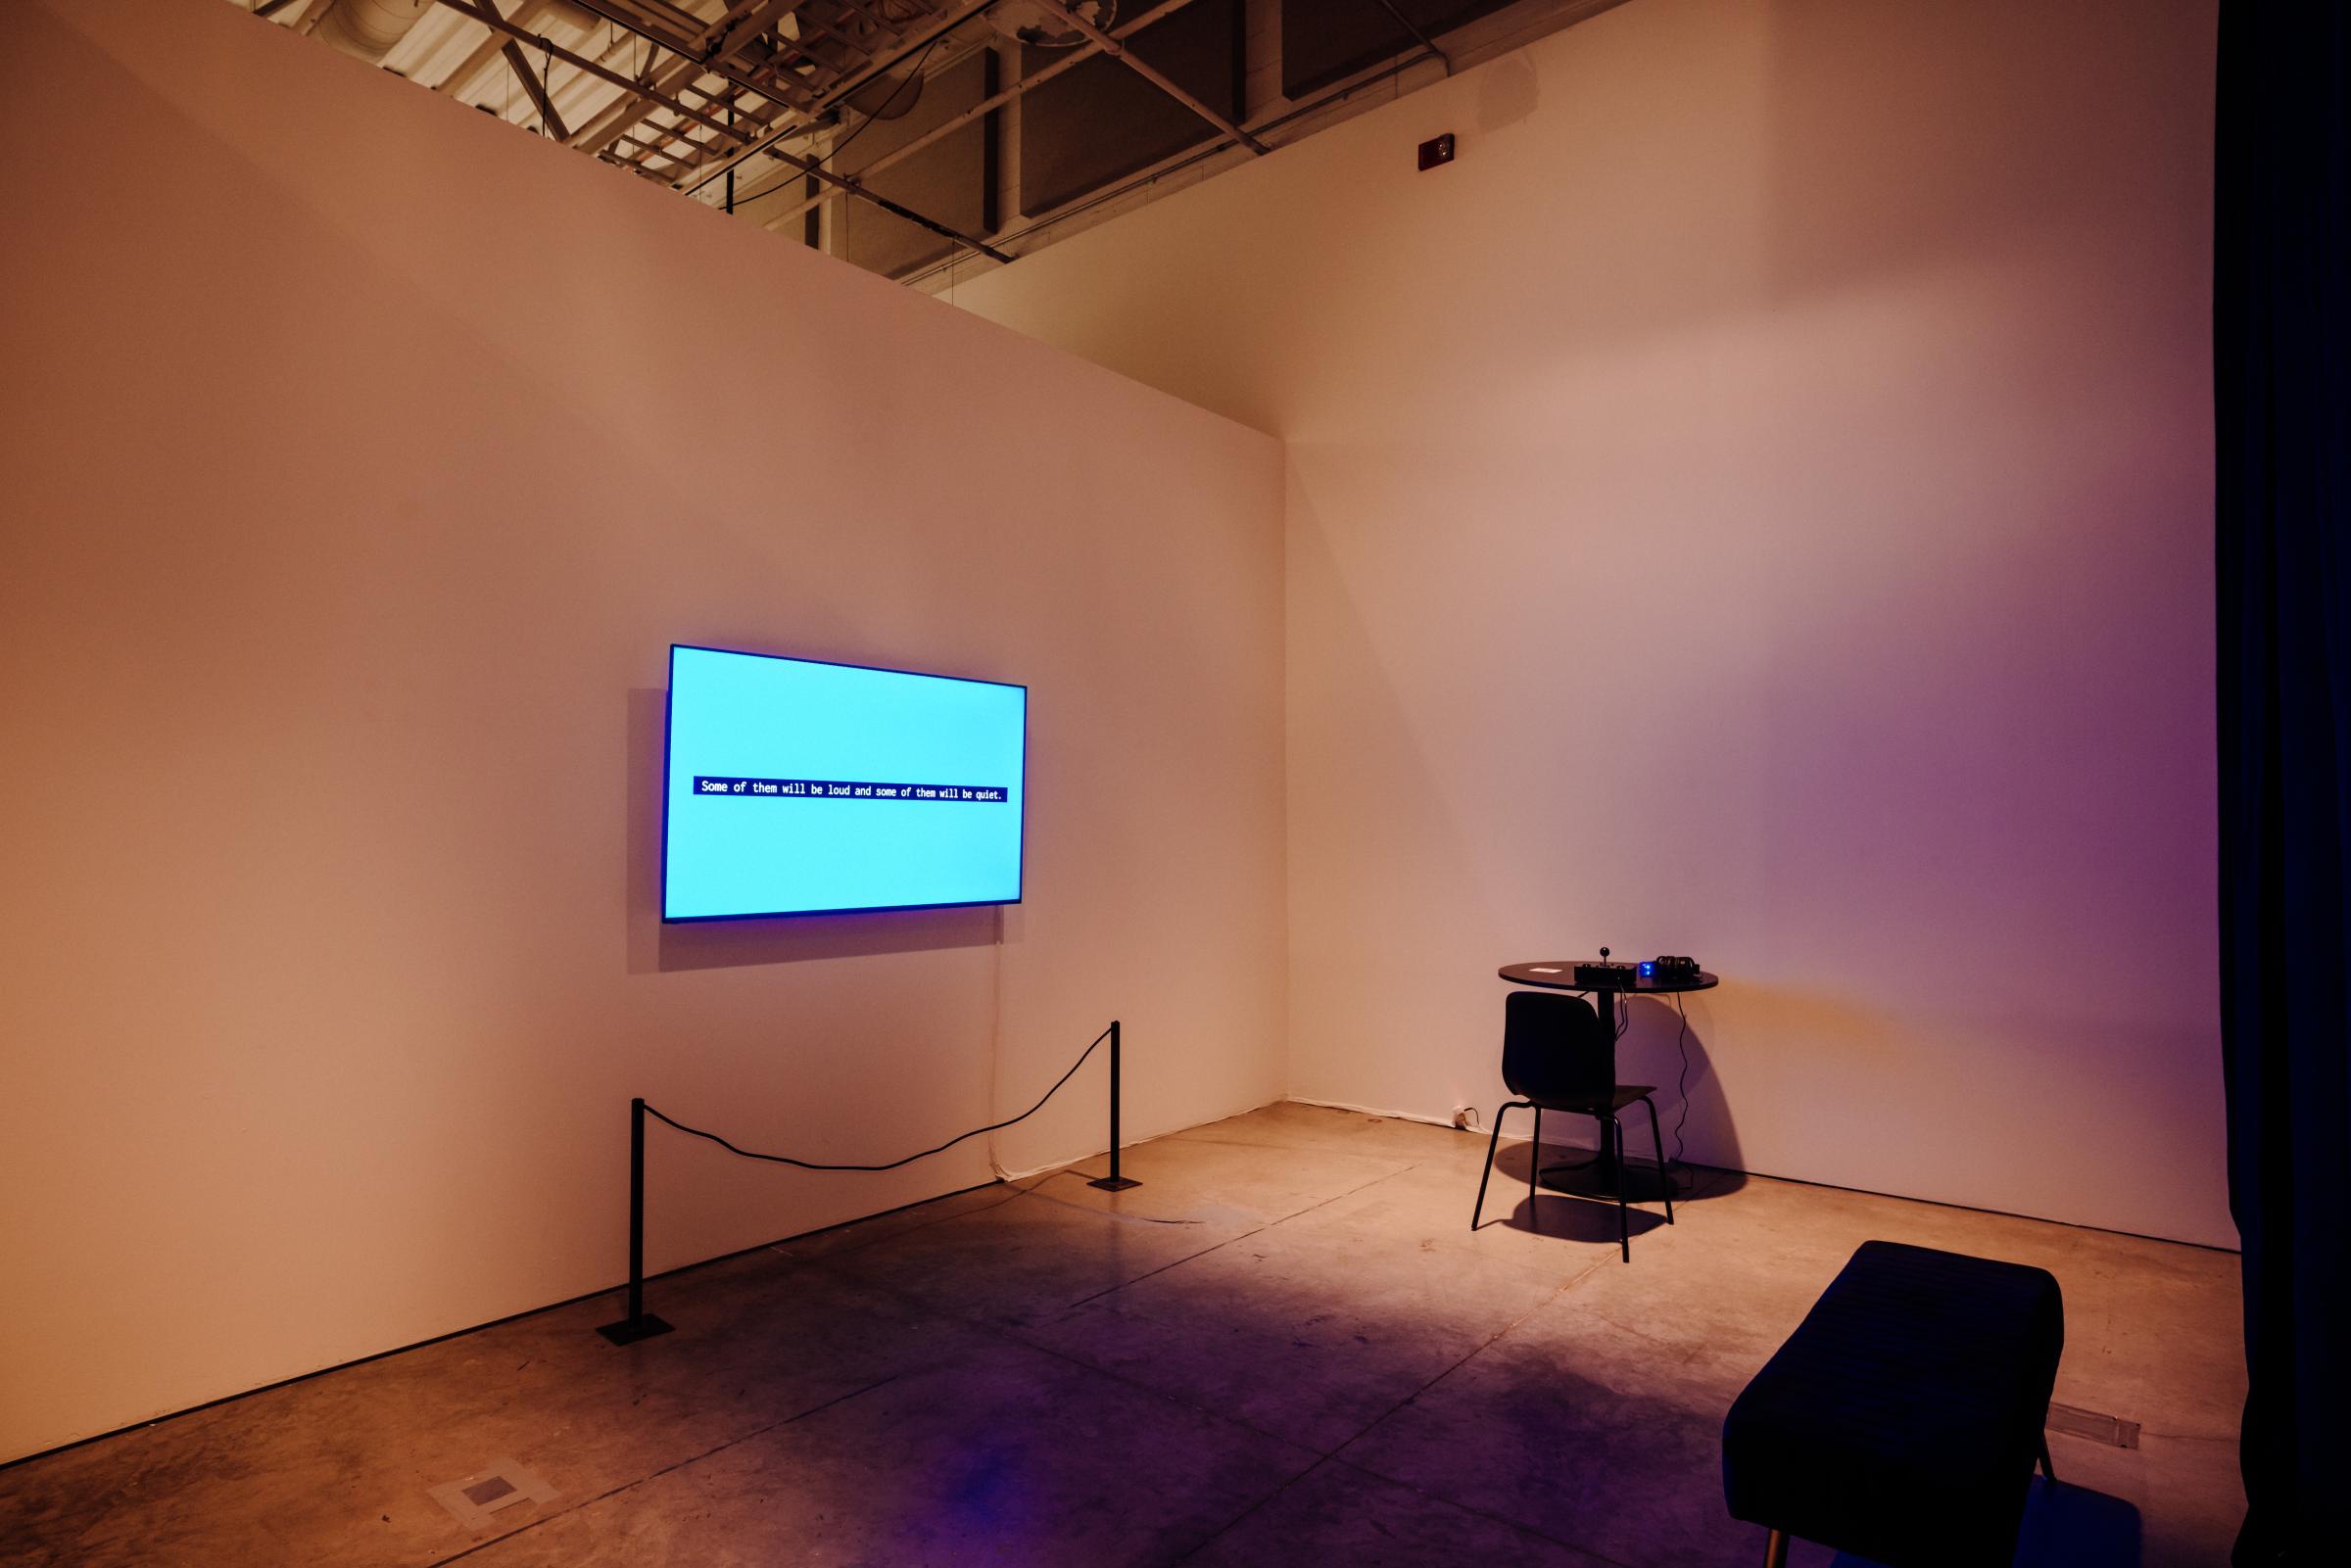 Room with a circular table against the back wall. A chair sits in front of the table, facing the wall. A large monitor displays text “Welcome to Unseen Sound.” Across from the monitor is a short bench. 

